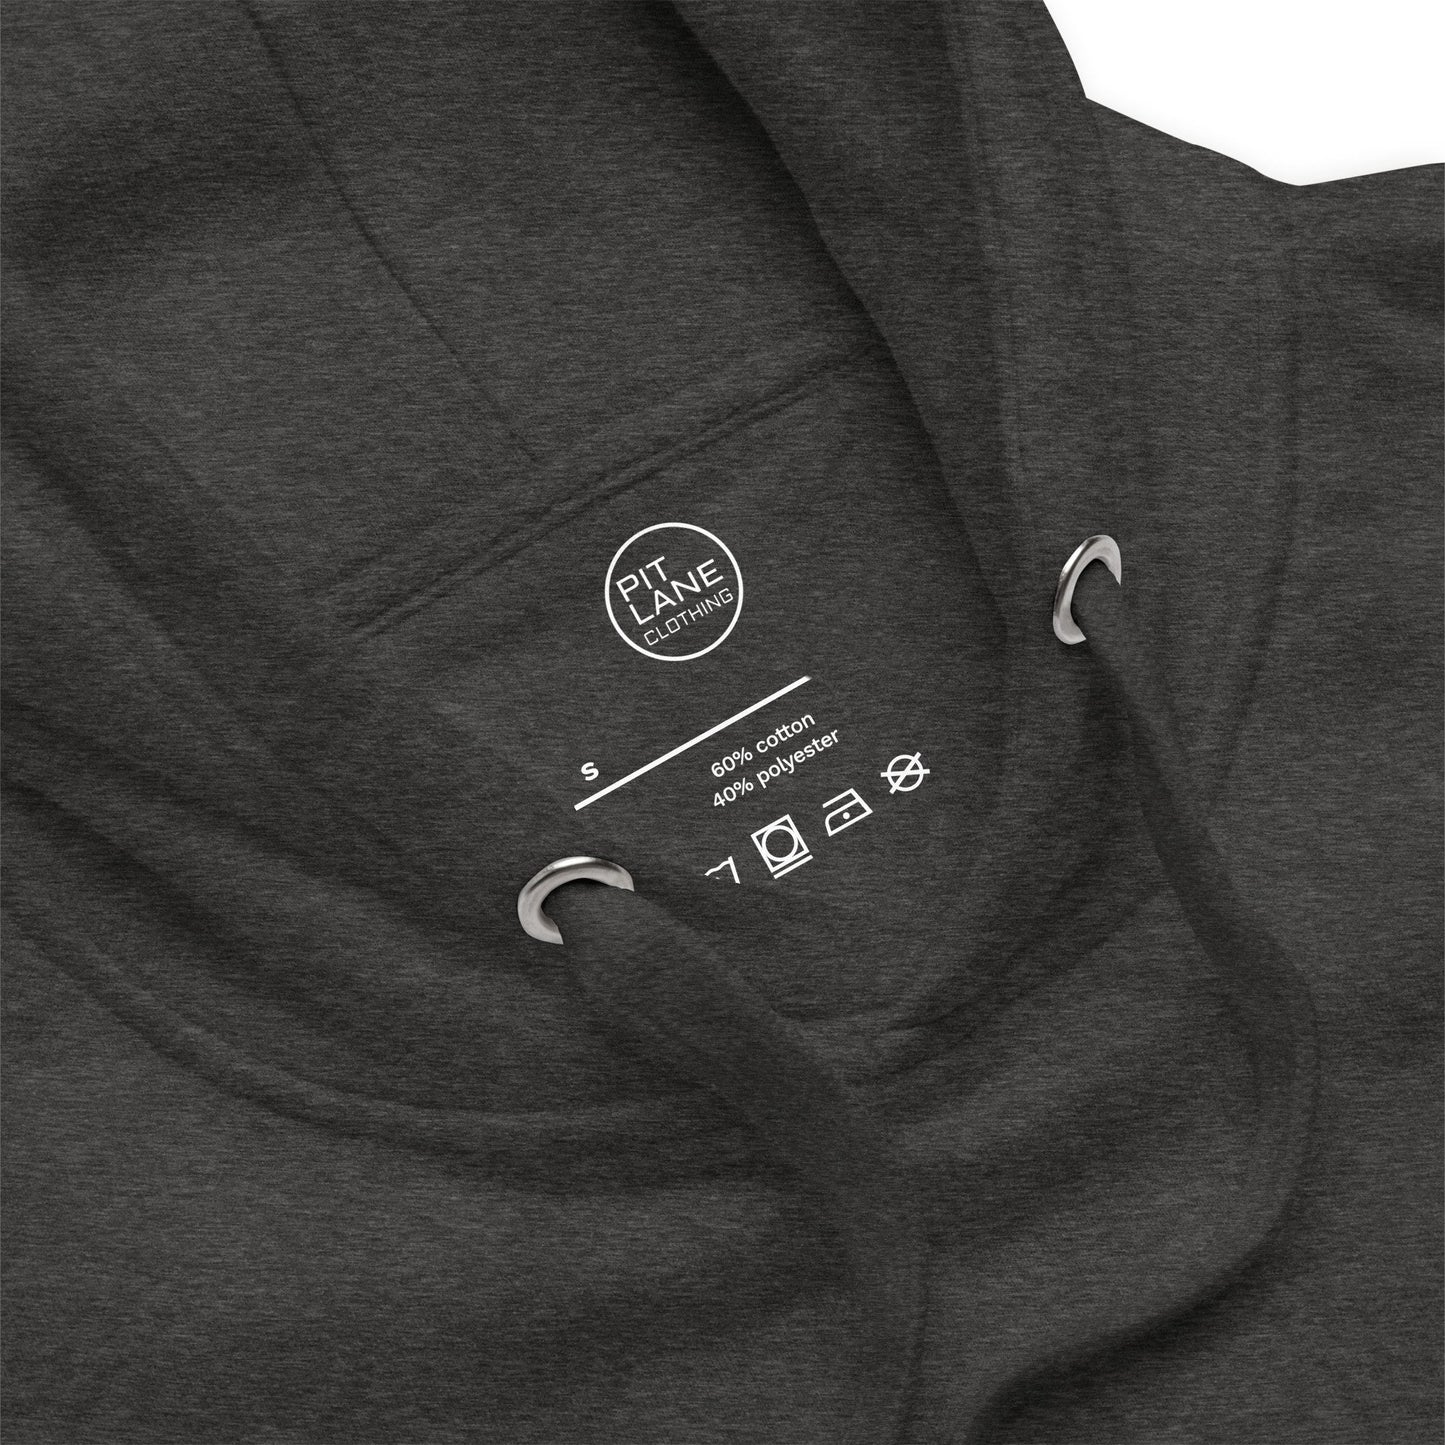 PIT LANE CLOTHING Embroidered Heavyweight Hoodie - Grey Carbon